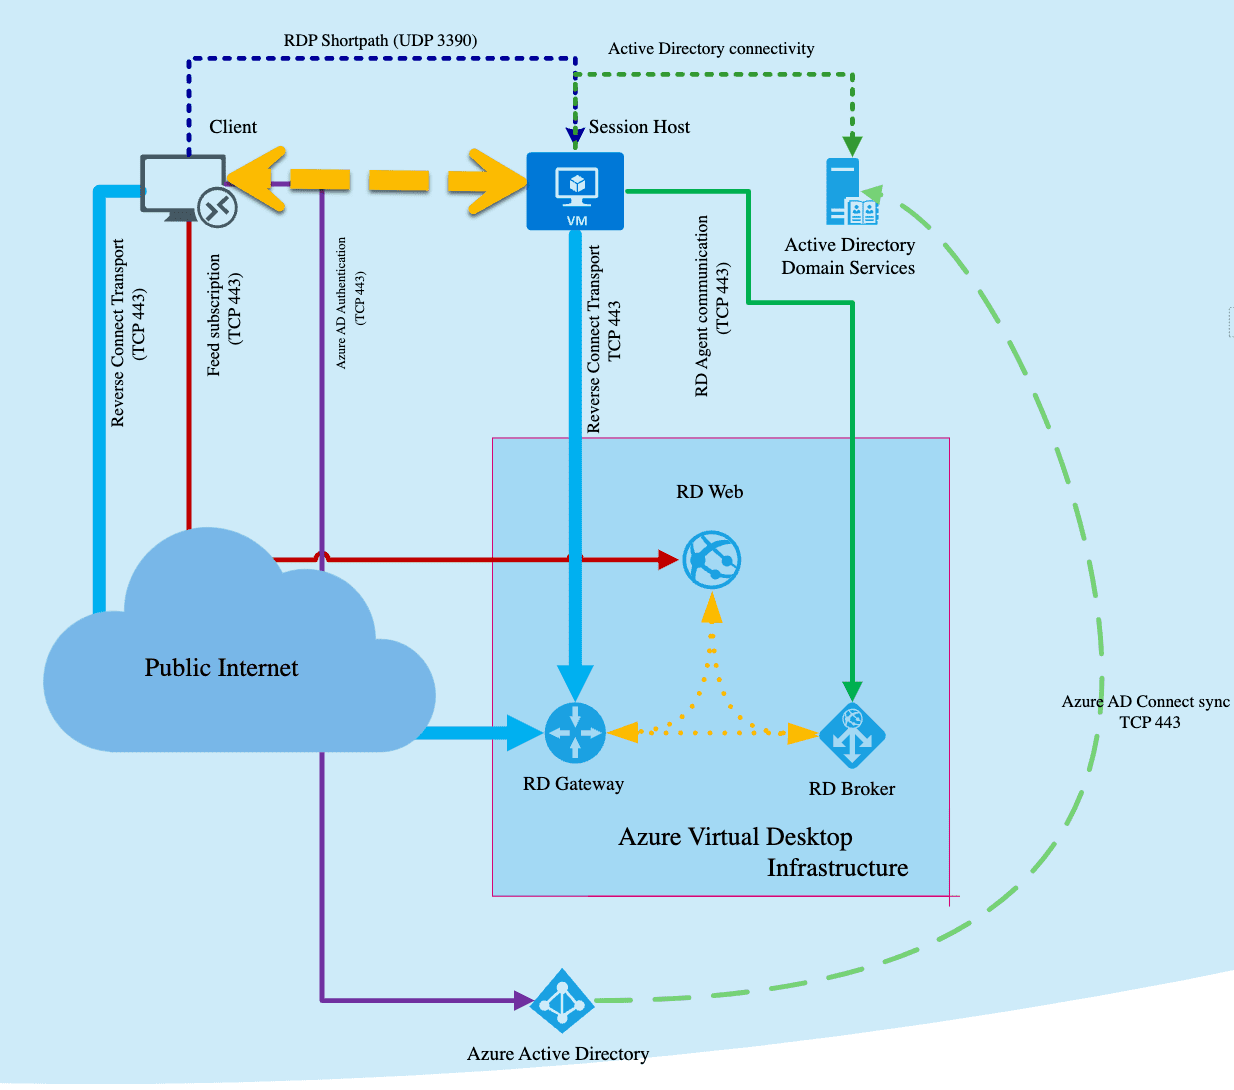 RDP short path uses the UDP protocol on port 3390